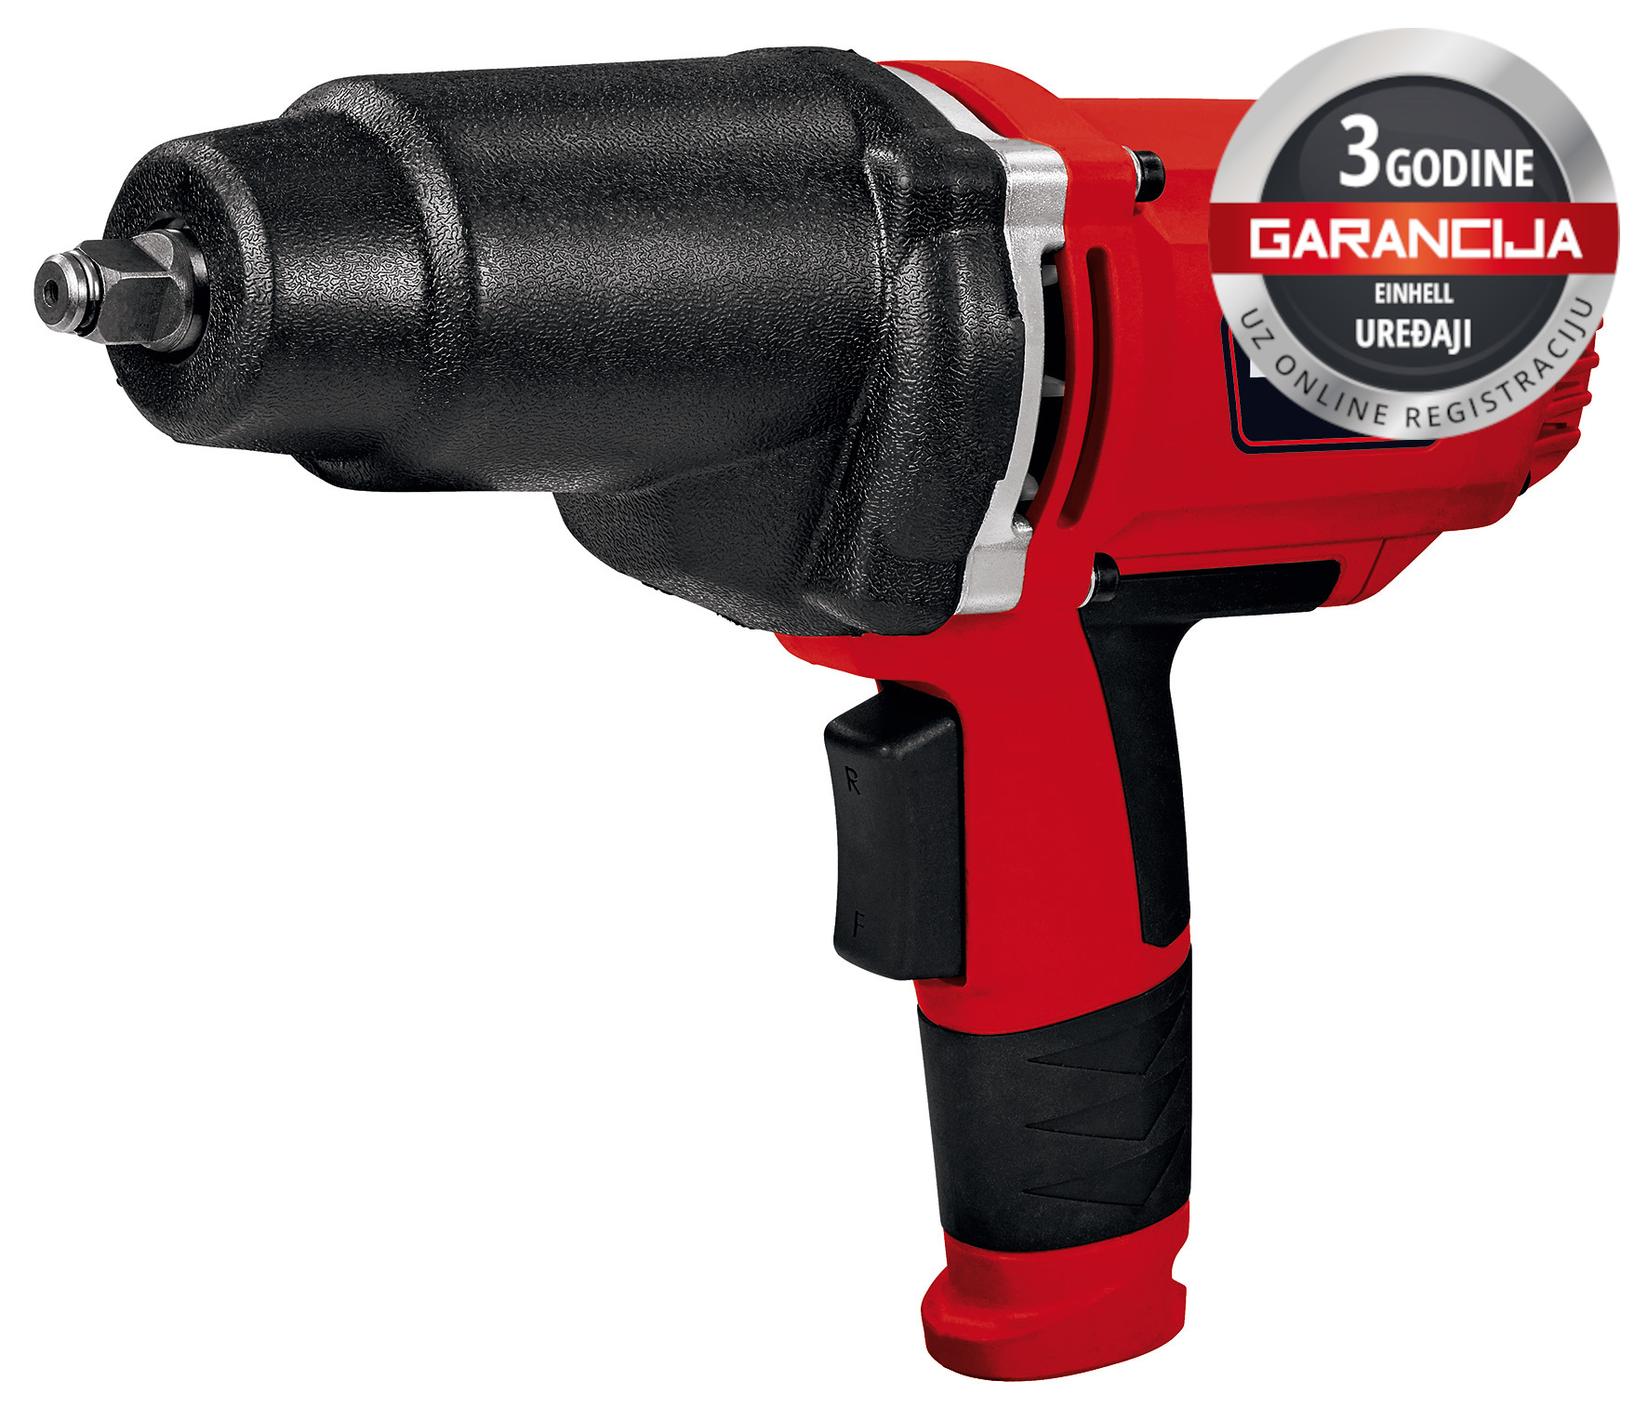 Selected image for Einhell CC-IW 950 Crno, Crveno 950 W